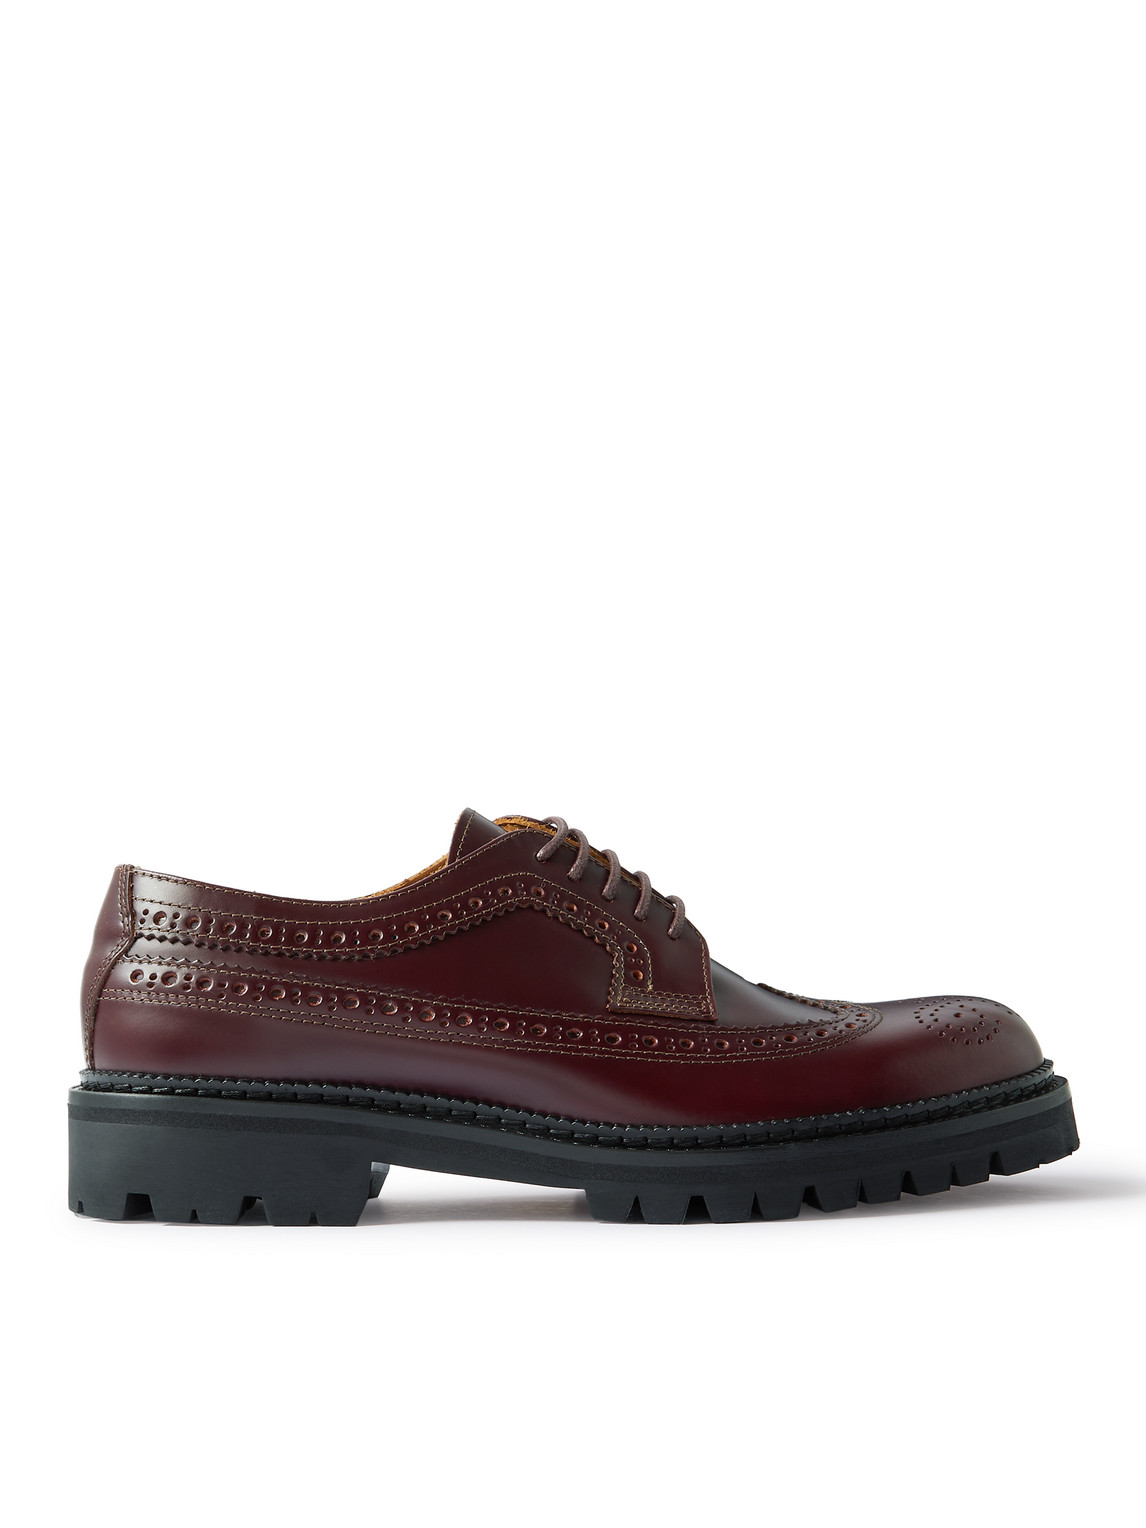 Mr P Jaques Leather Brogues In Brown